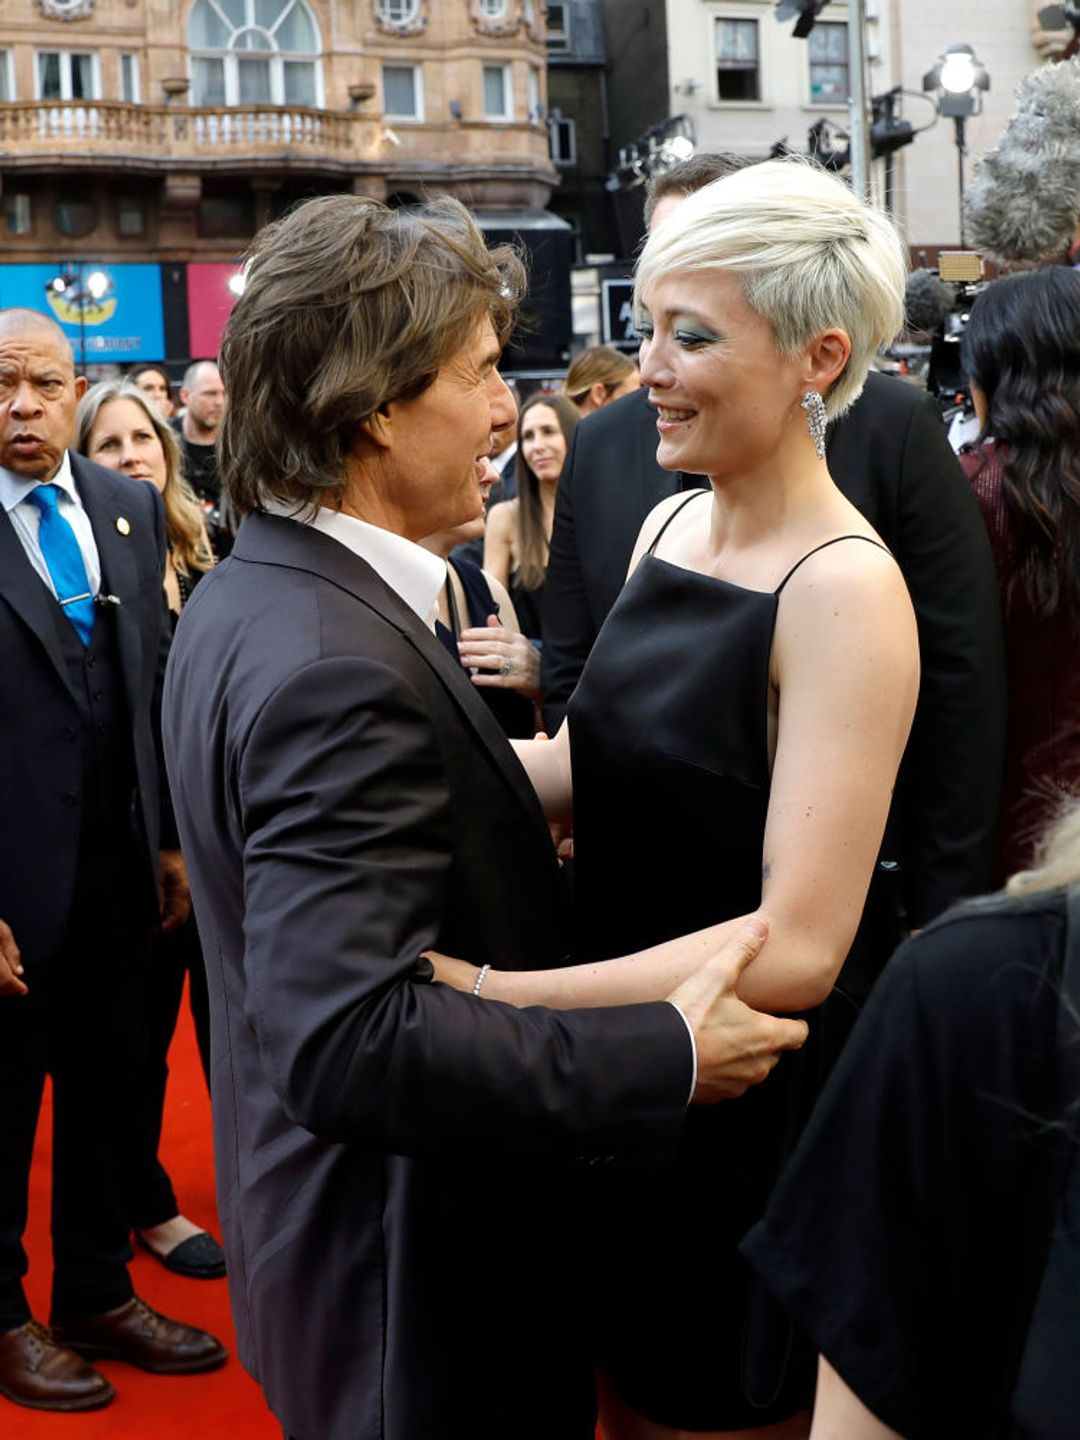 Pom Klementieff and Tom Cruise stop for a sweet reunion on the red carpet